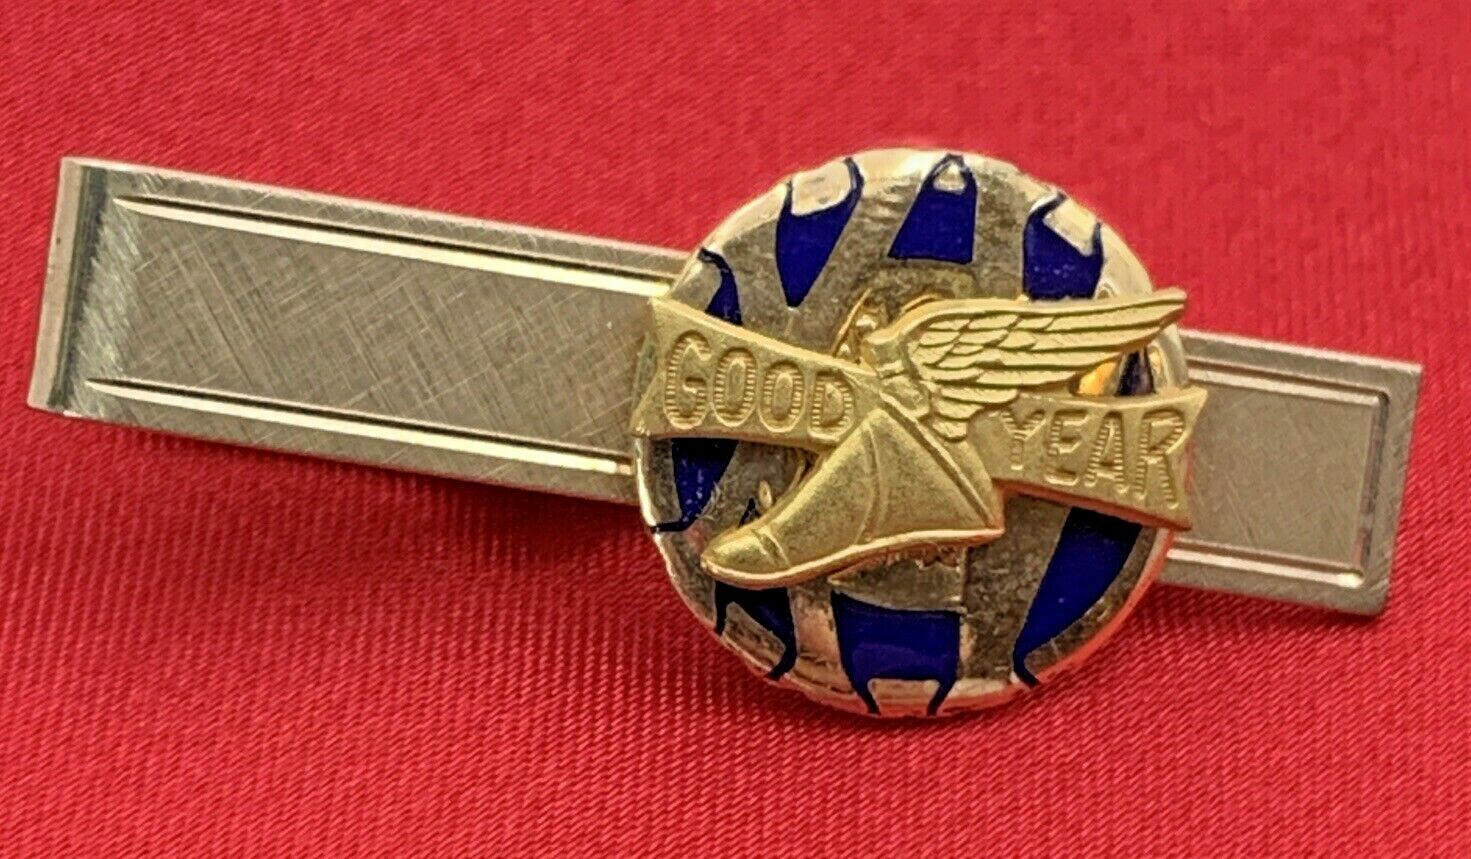 Primary image for Good Year Tie Clip Winged Foot Goodyear 15 Year Vintage 1/10-10K 21-242